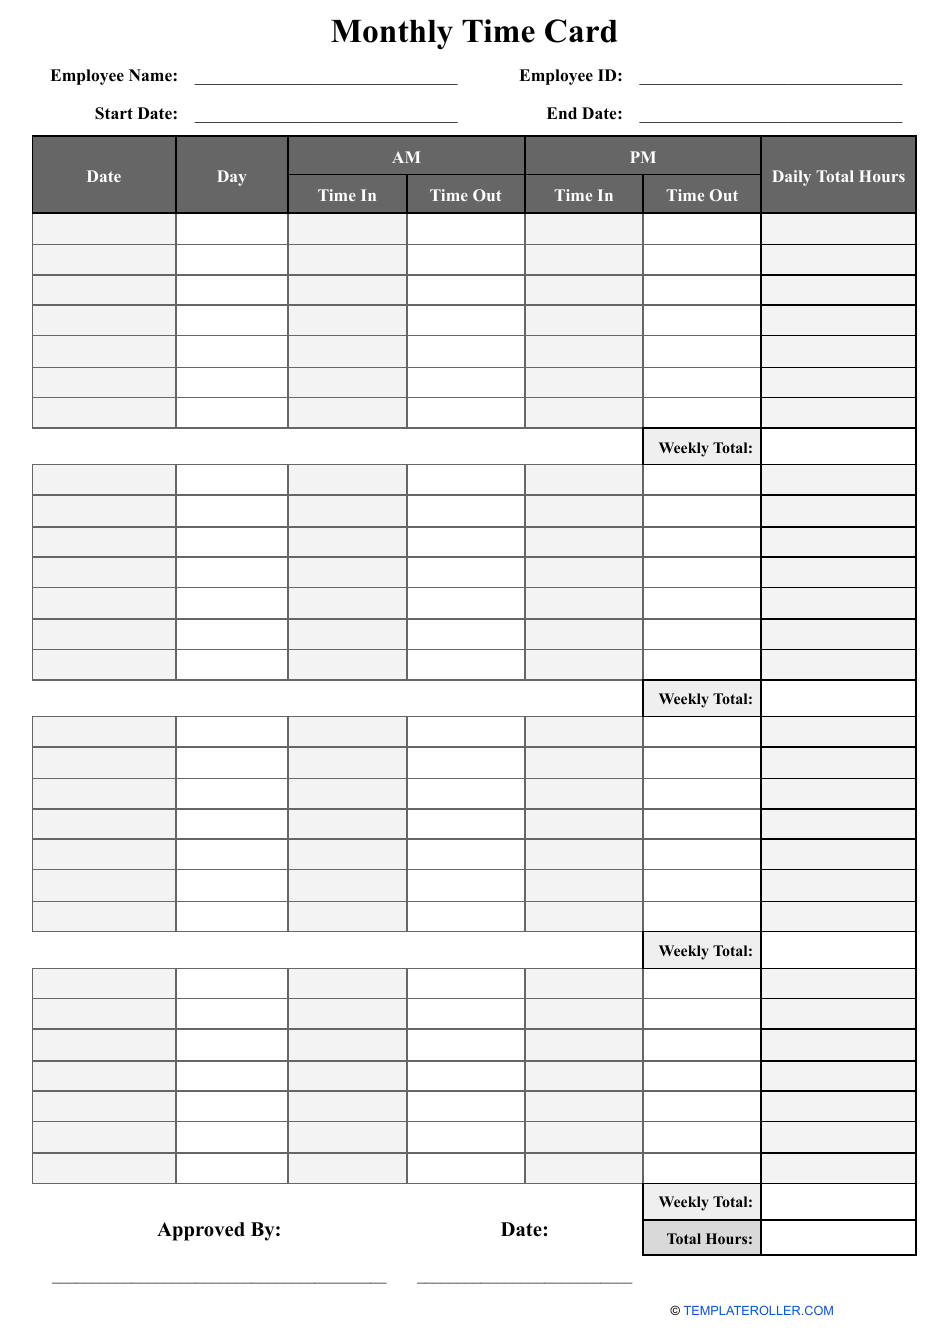 Monthly Time Card Template - Seven Columns